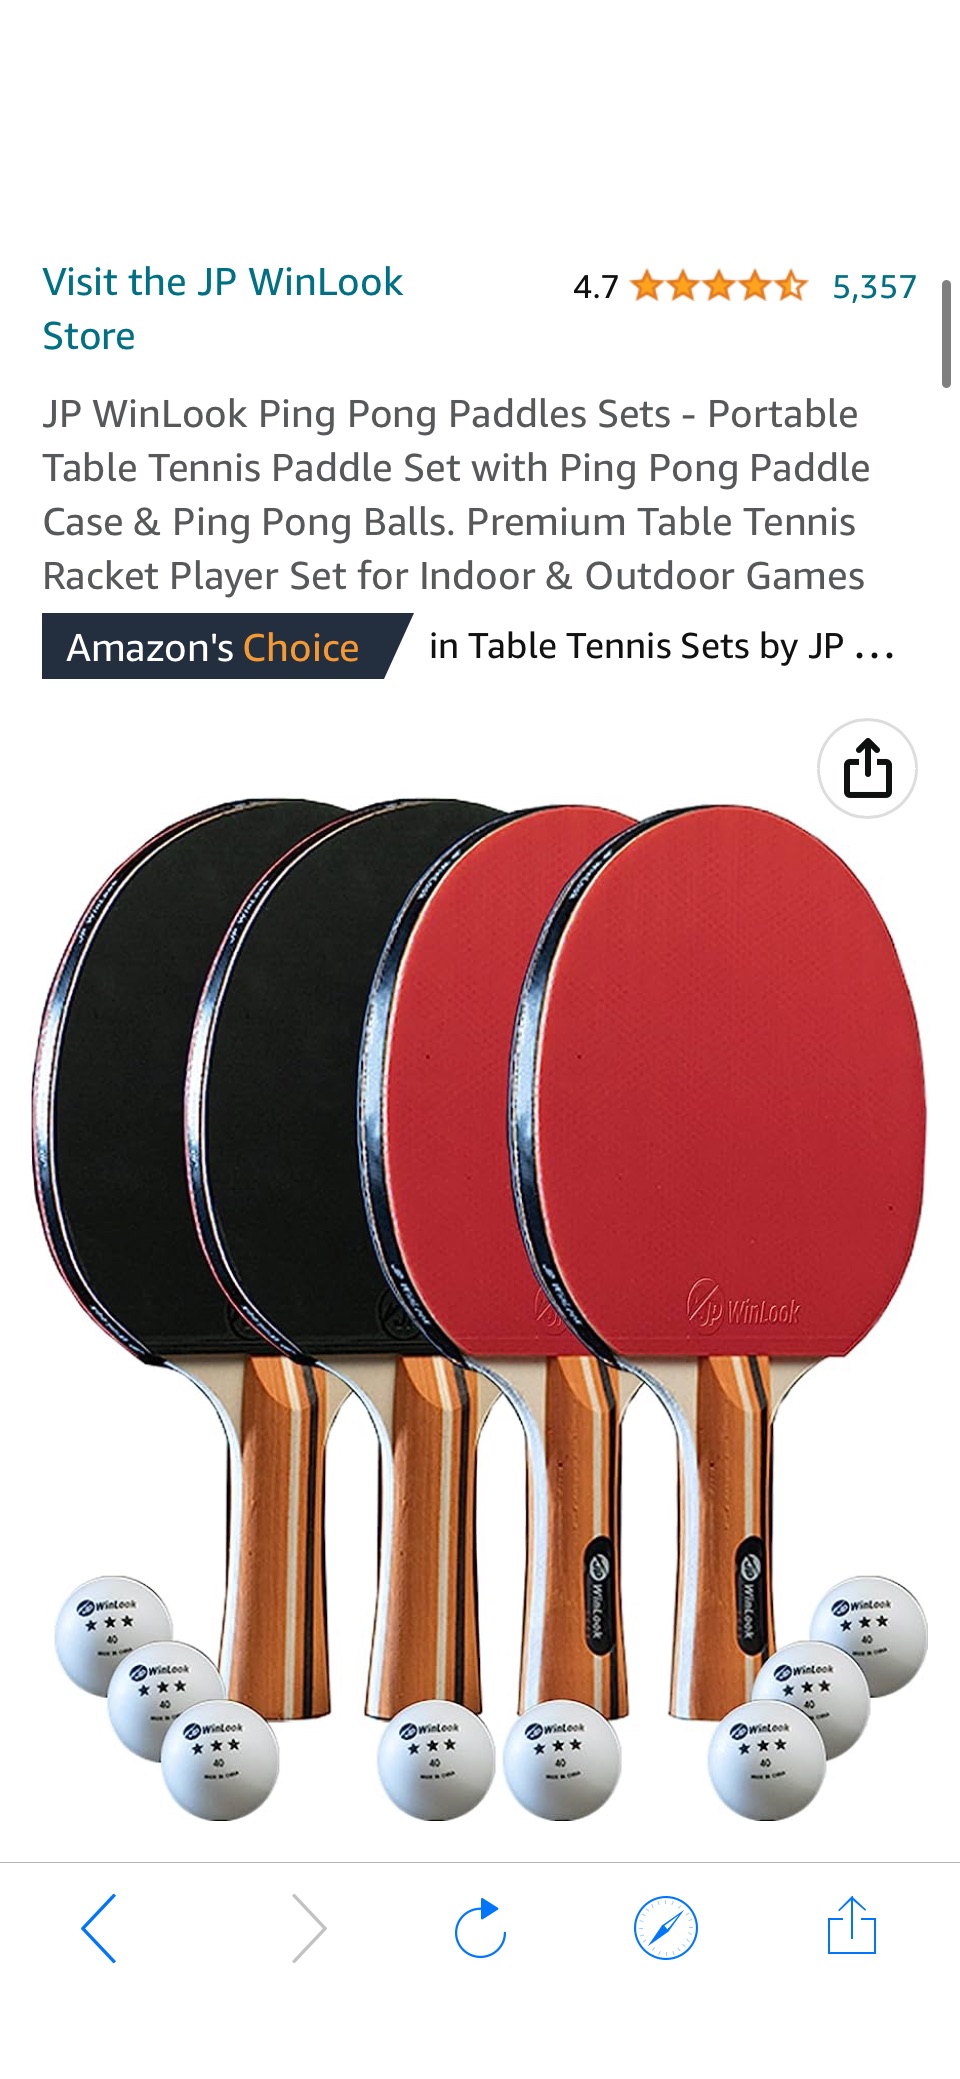 Amazon.com : JP WinLook Ping Pong Paddles Set of 4 - Portable Table Tennis Paddle Set with Ping Pong Paddle Case & 8 Ping Pong Balls. Premium Table Tennis Racket 4 Player Set for Indoor & 原价49.99